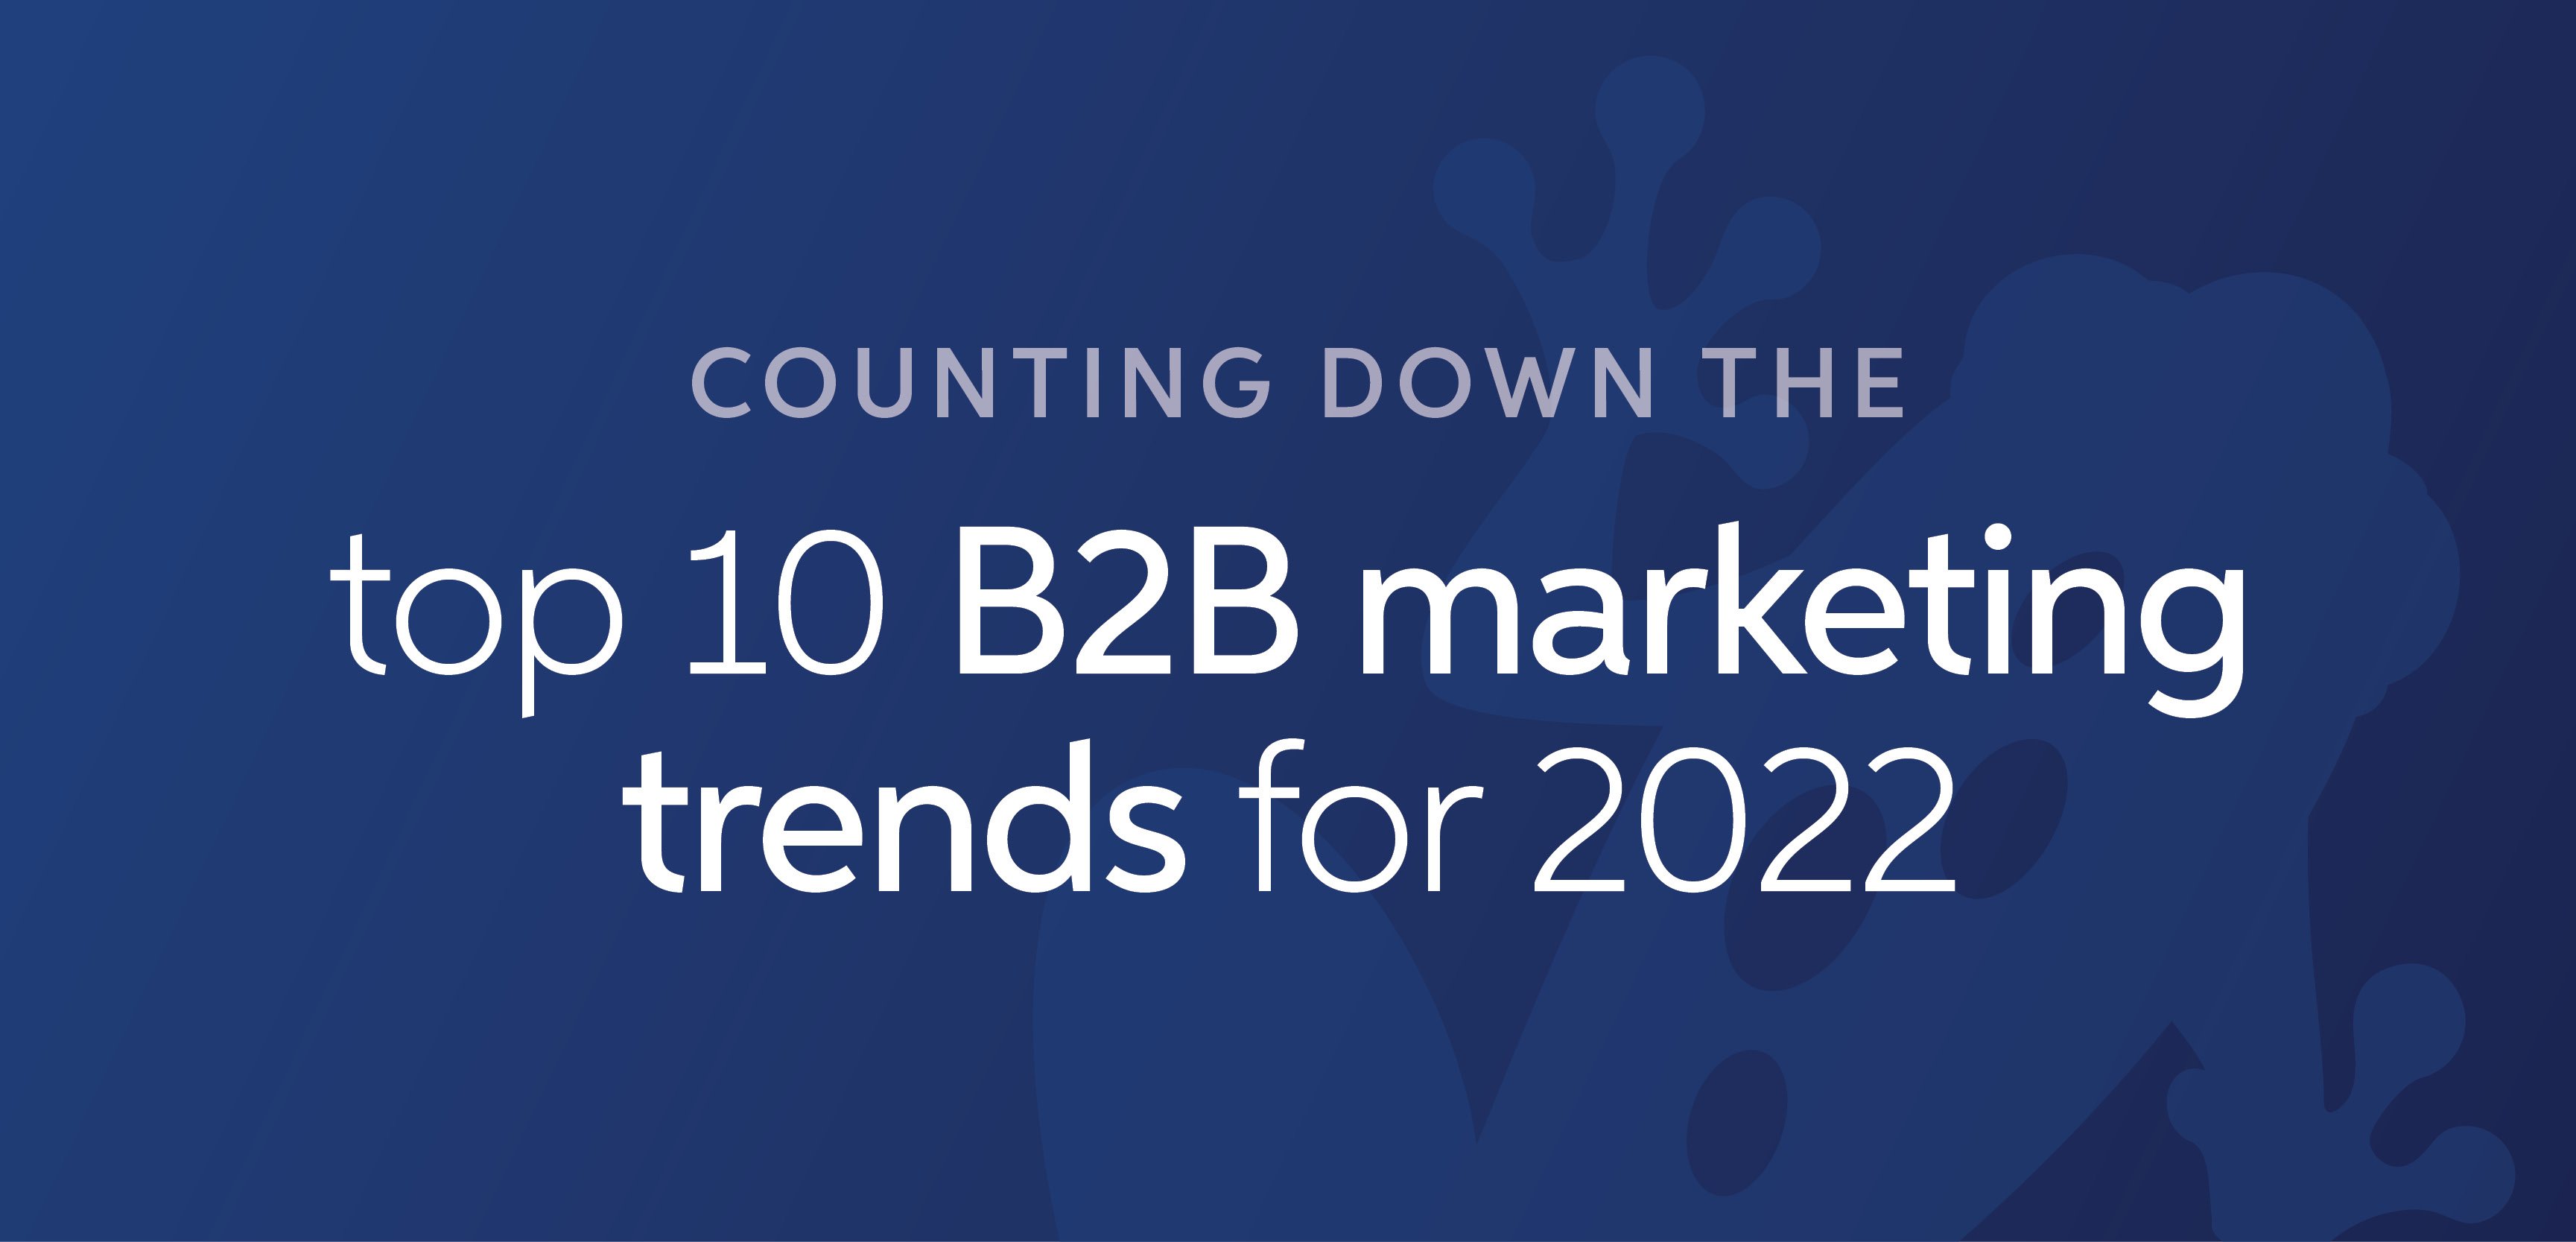 Top 10 B2B Marketing Trends for 2022